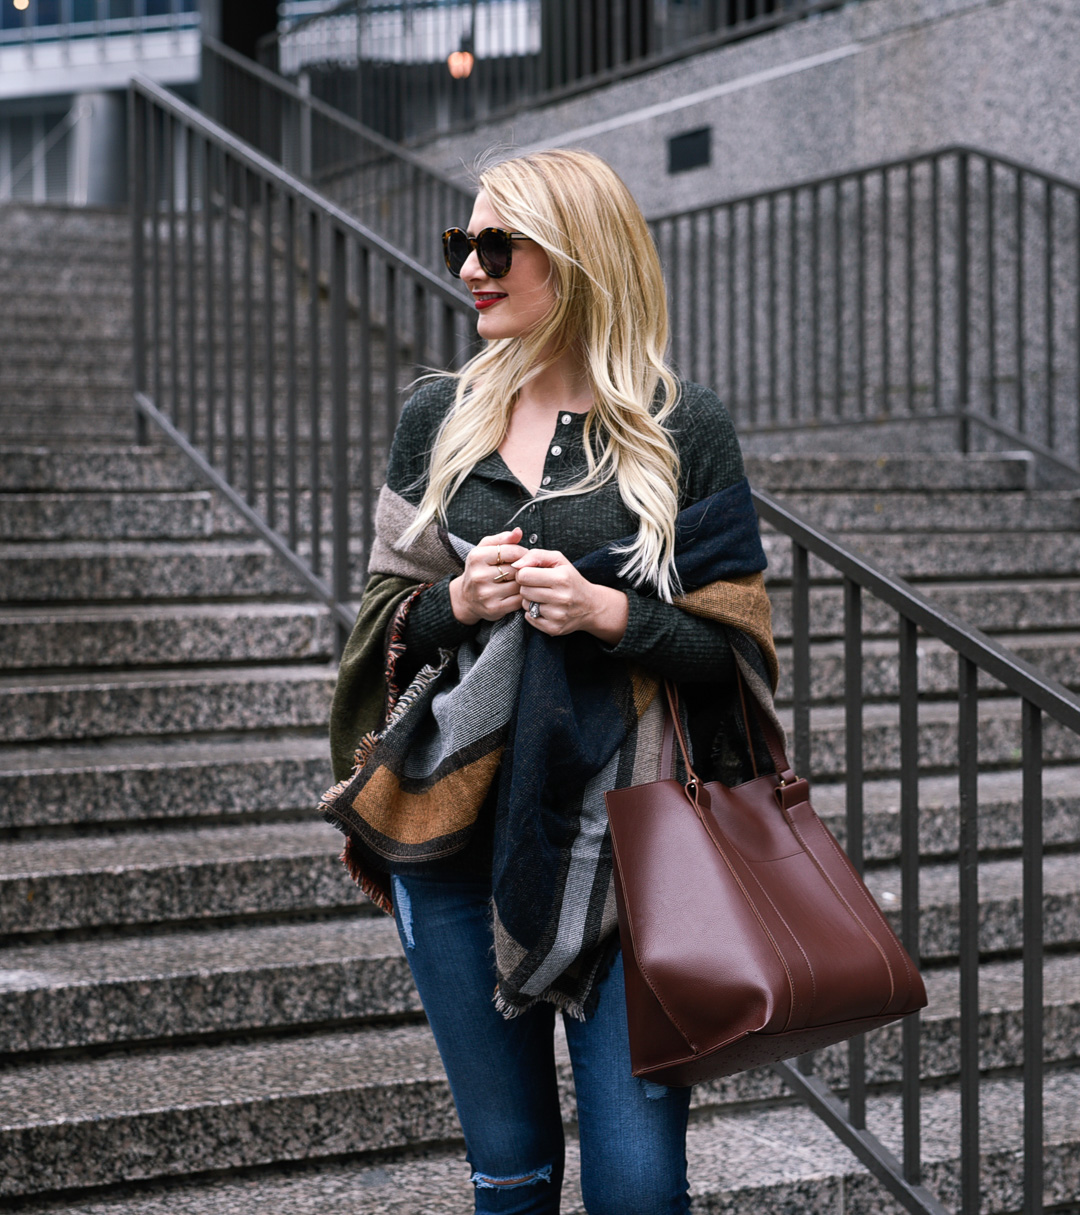 Jenna Colgrove wearing the Sole Society Ravin tote in dark brown, a geometric printed scarf, and a hunter green henley.